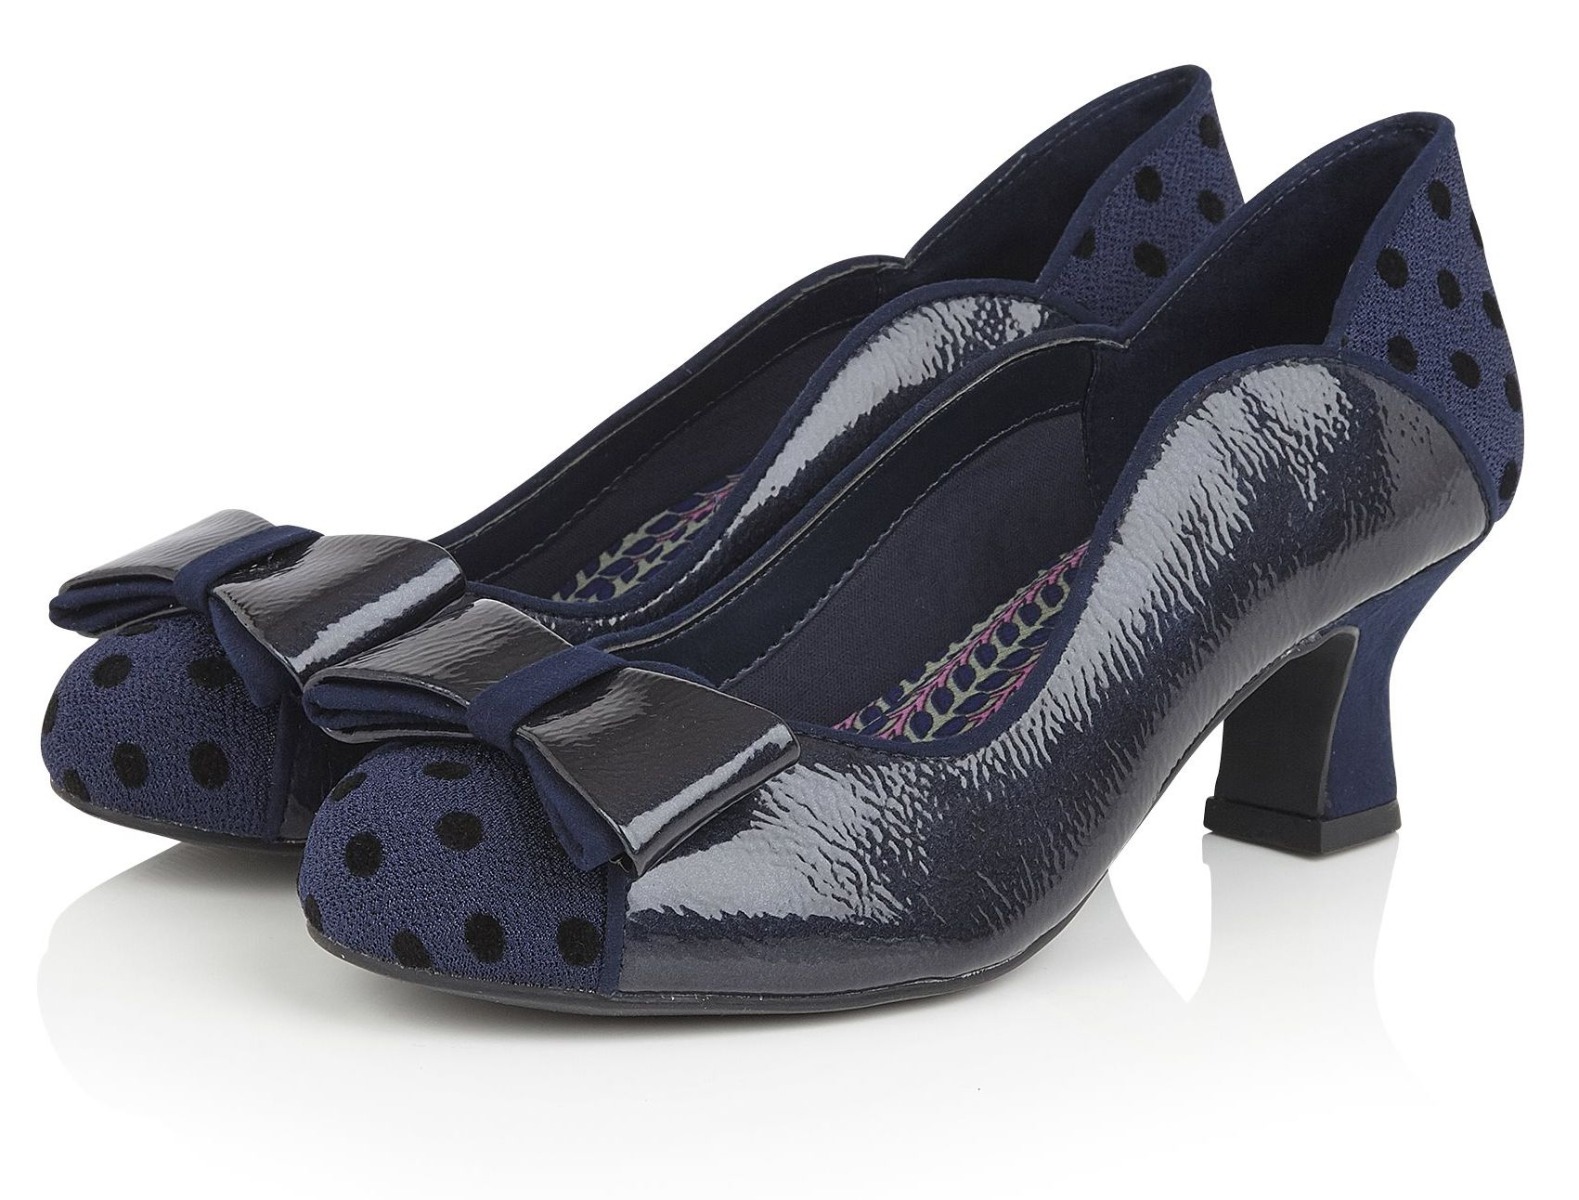 rs09311_chaussures-escarpins-pin-up-retro-50-s-glam-chic-melody-navy